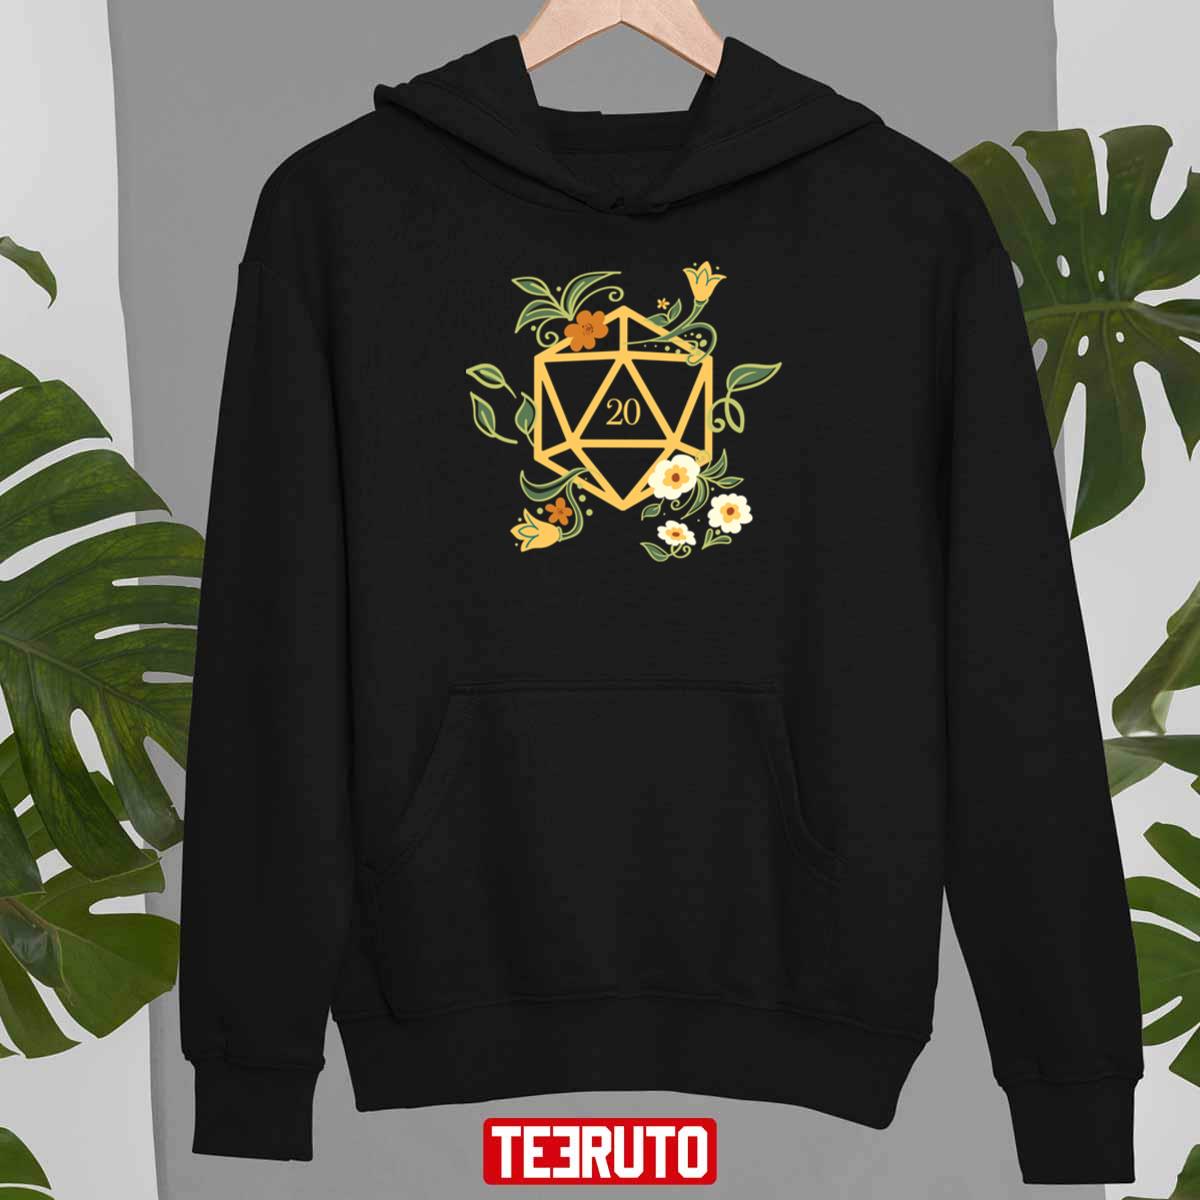 Plant Lovers Polyhedral D20 Dice Unisex T-Shirt